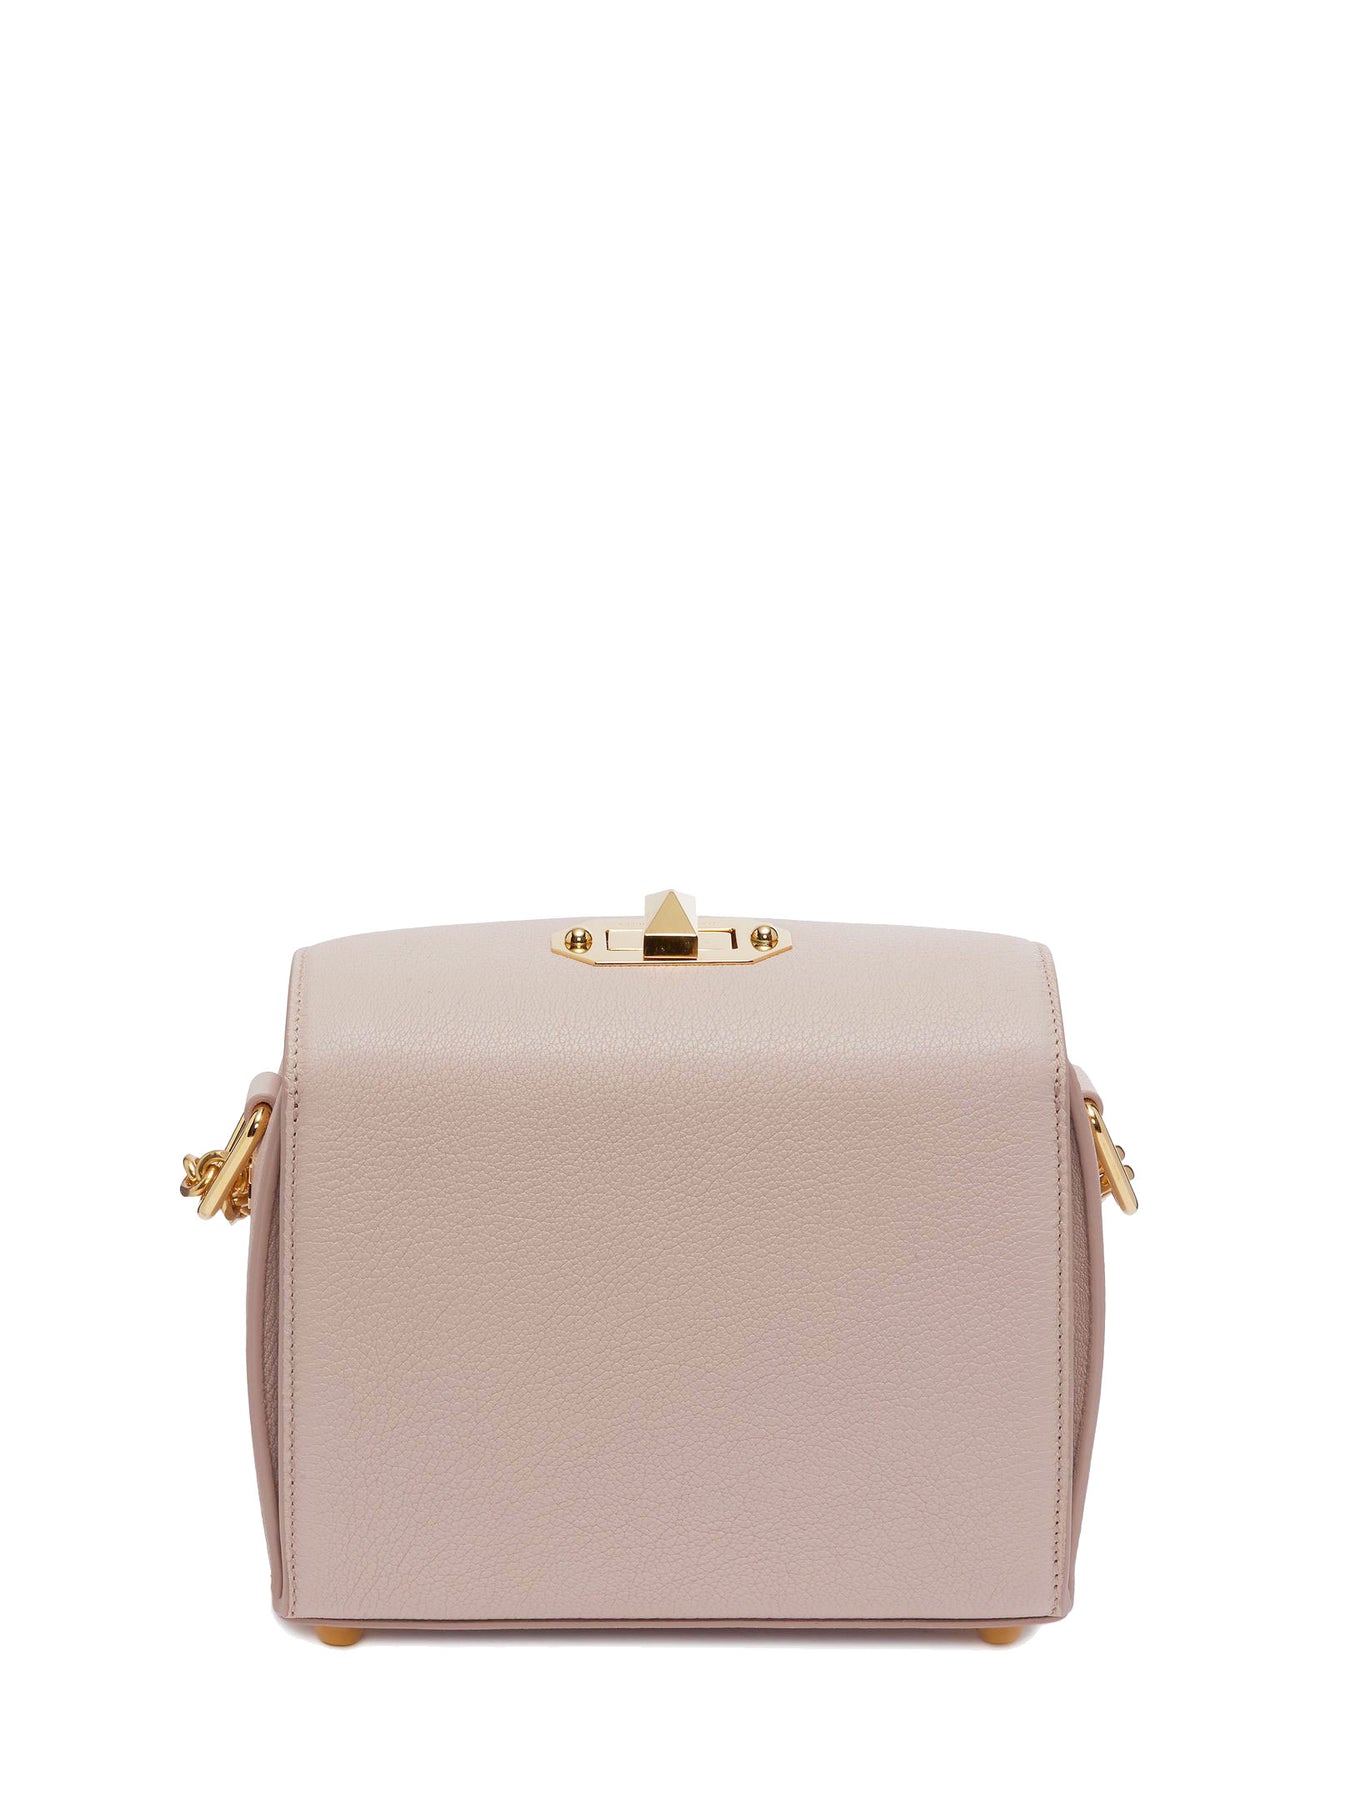 Alexander McQueen Box Bag in Off White with Gold Hardware